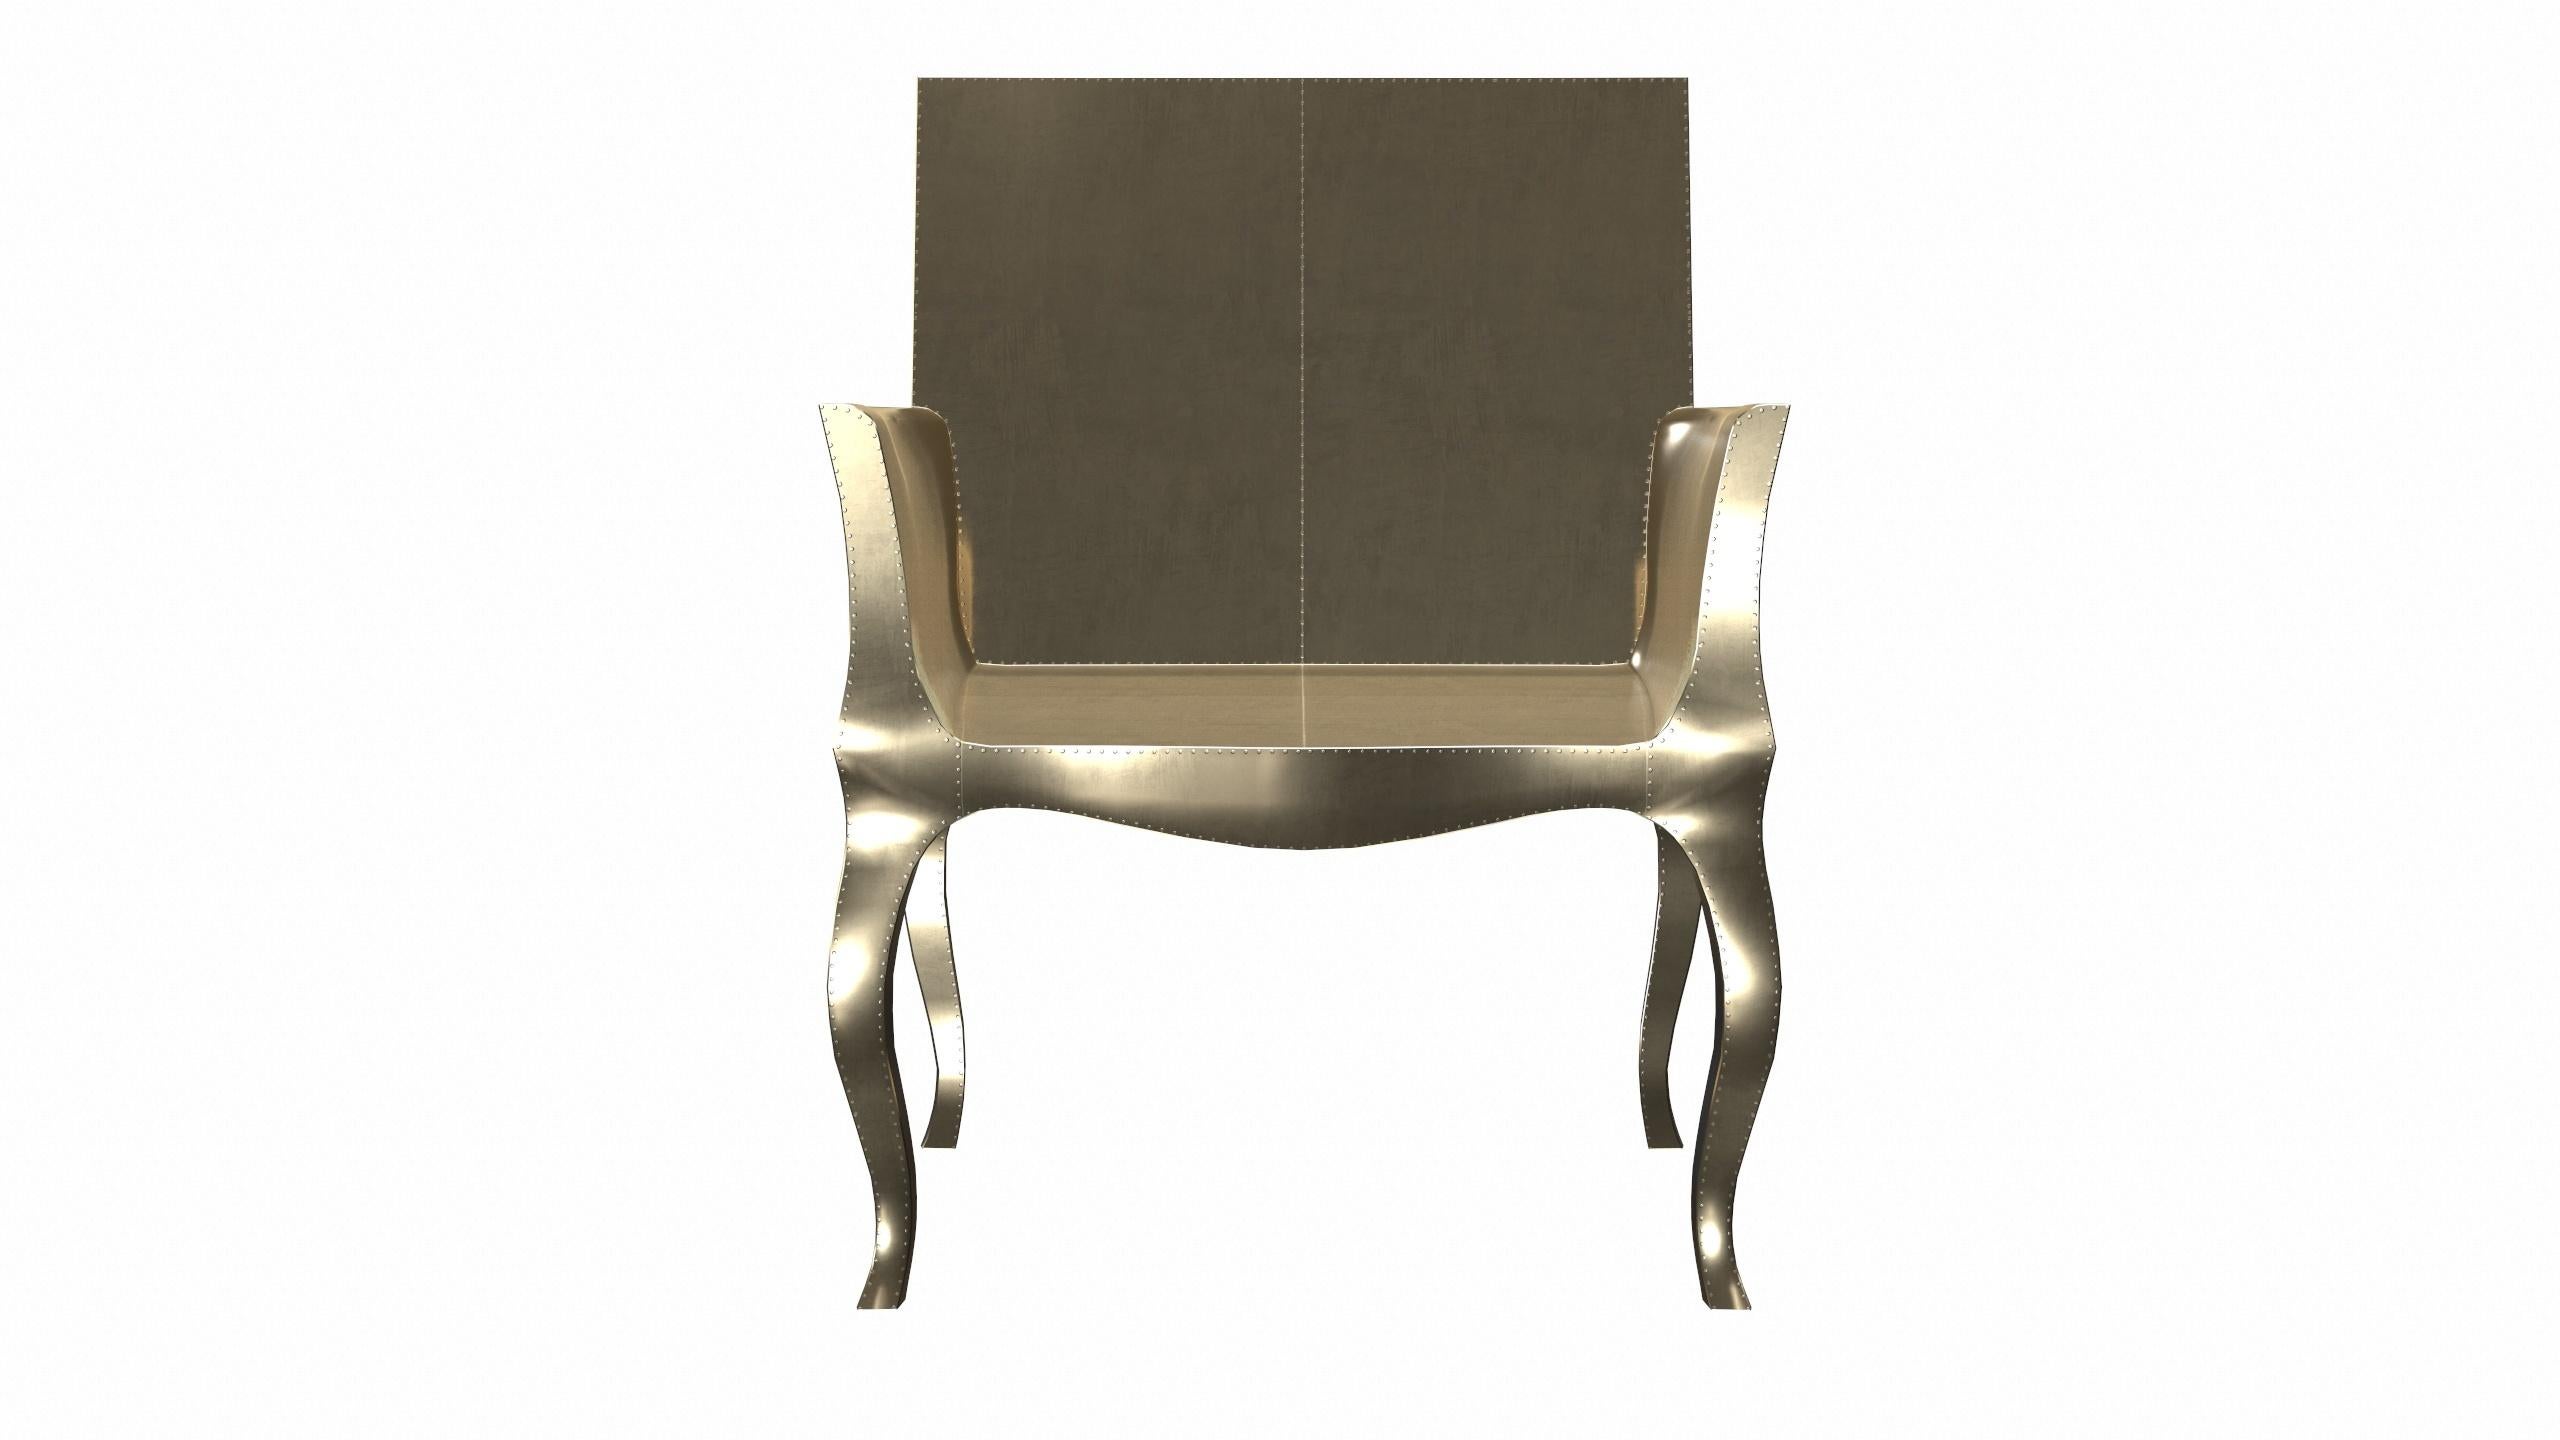 Indian Art Deco Club Chairs in Smooth Brass by Paul Mathieu for S. Odegard For Sale